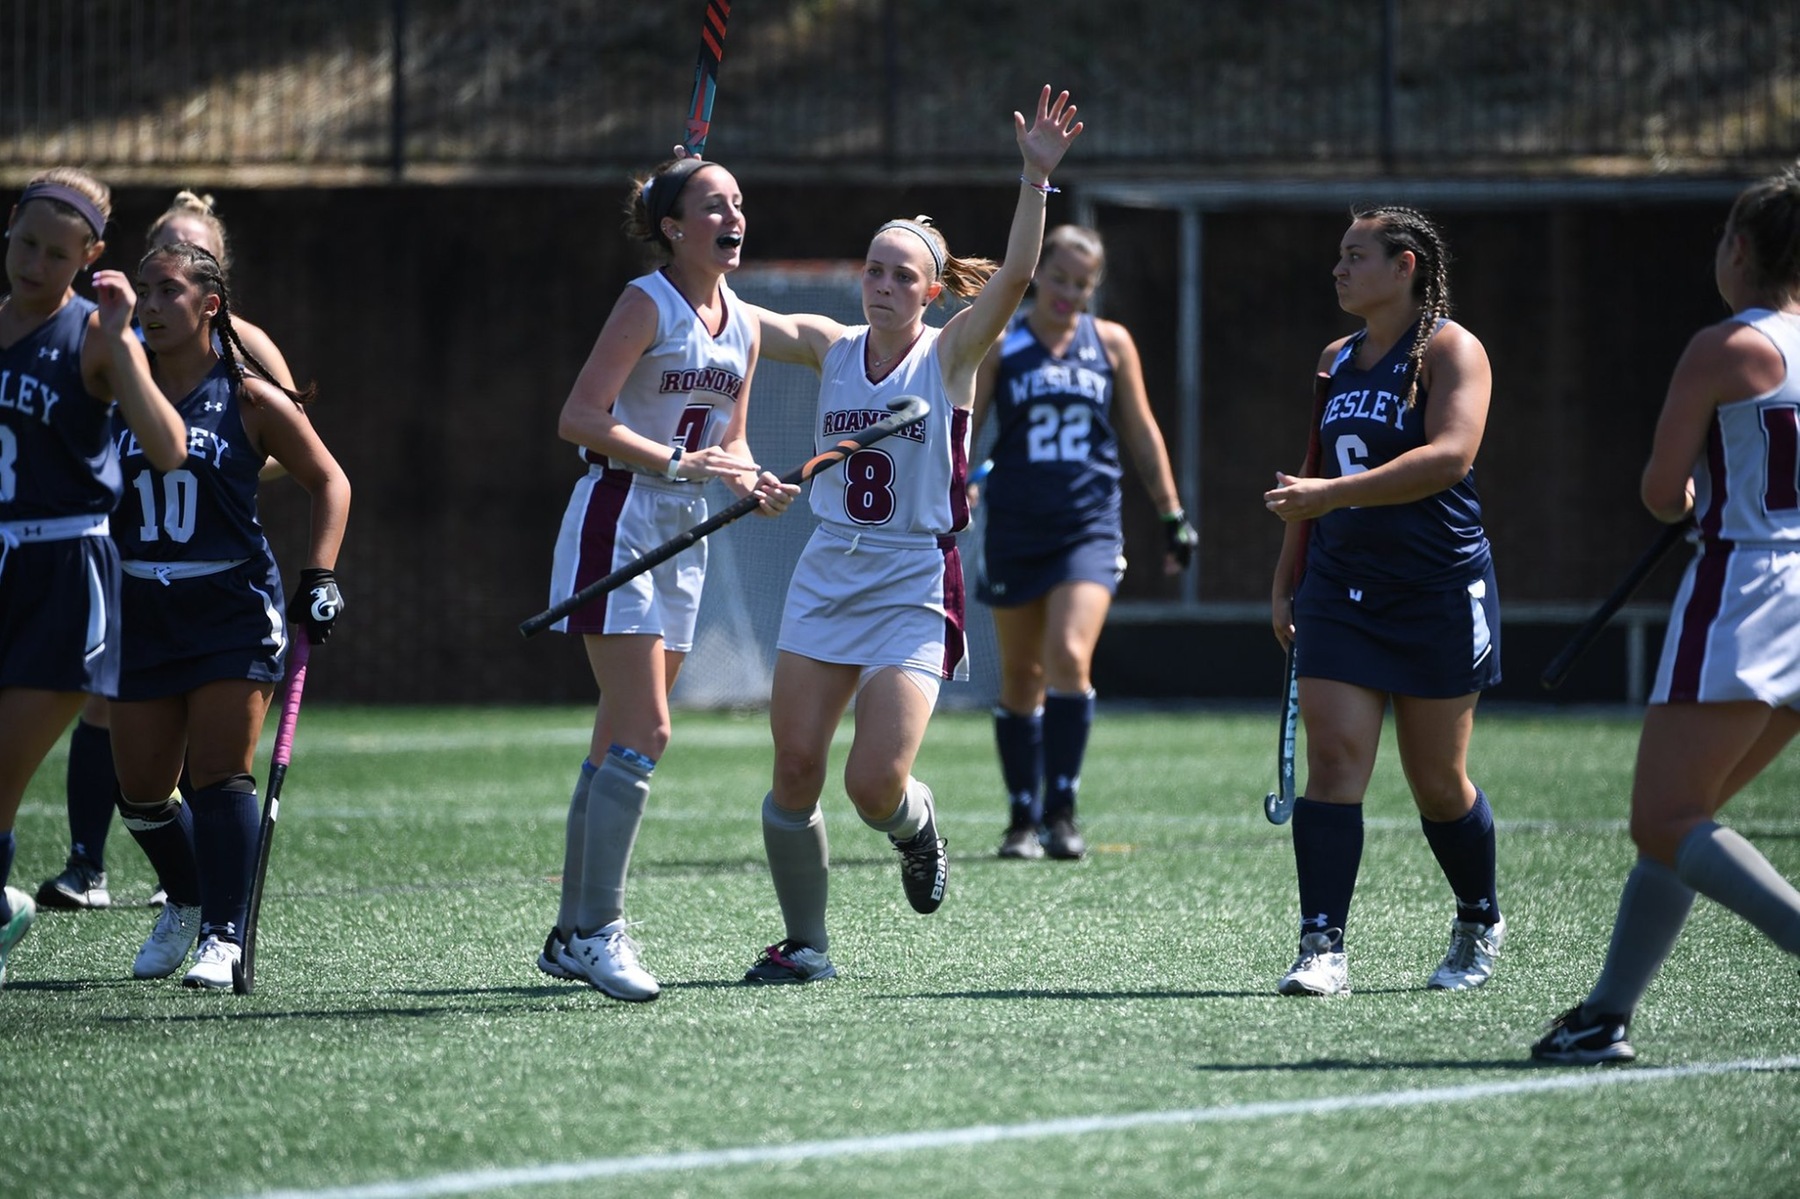 Martha Hurley had a pair of goals in a win over Sewanee